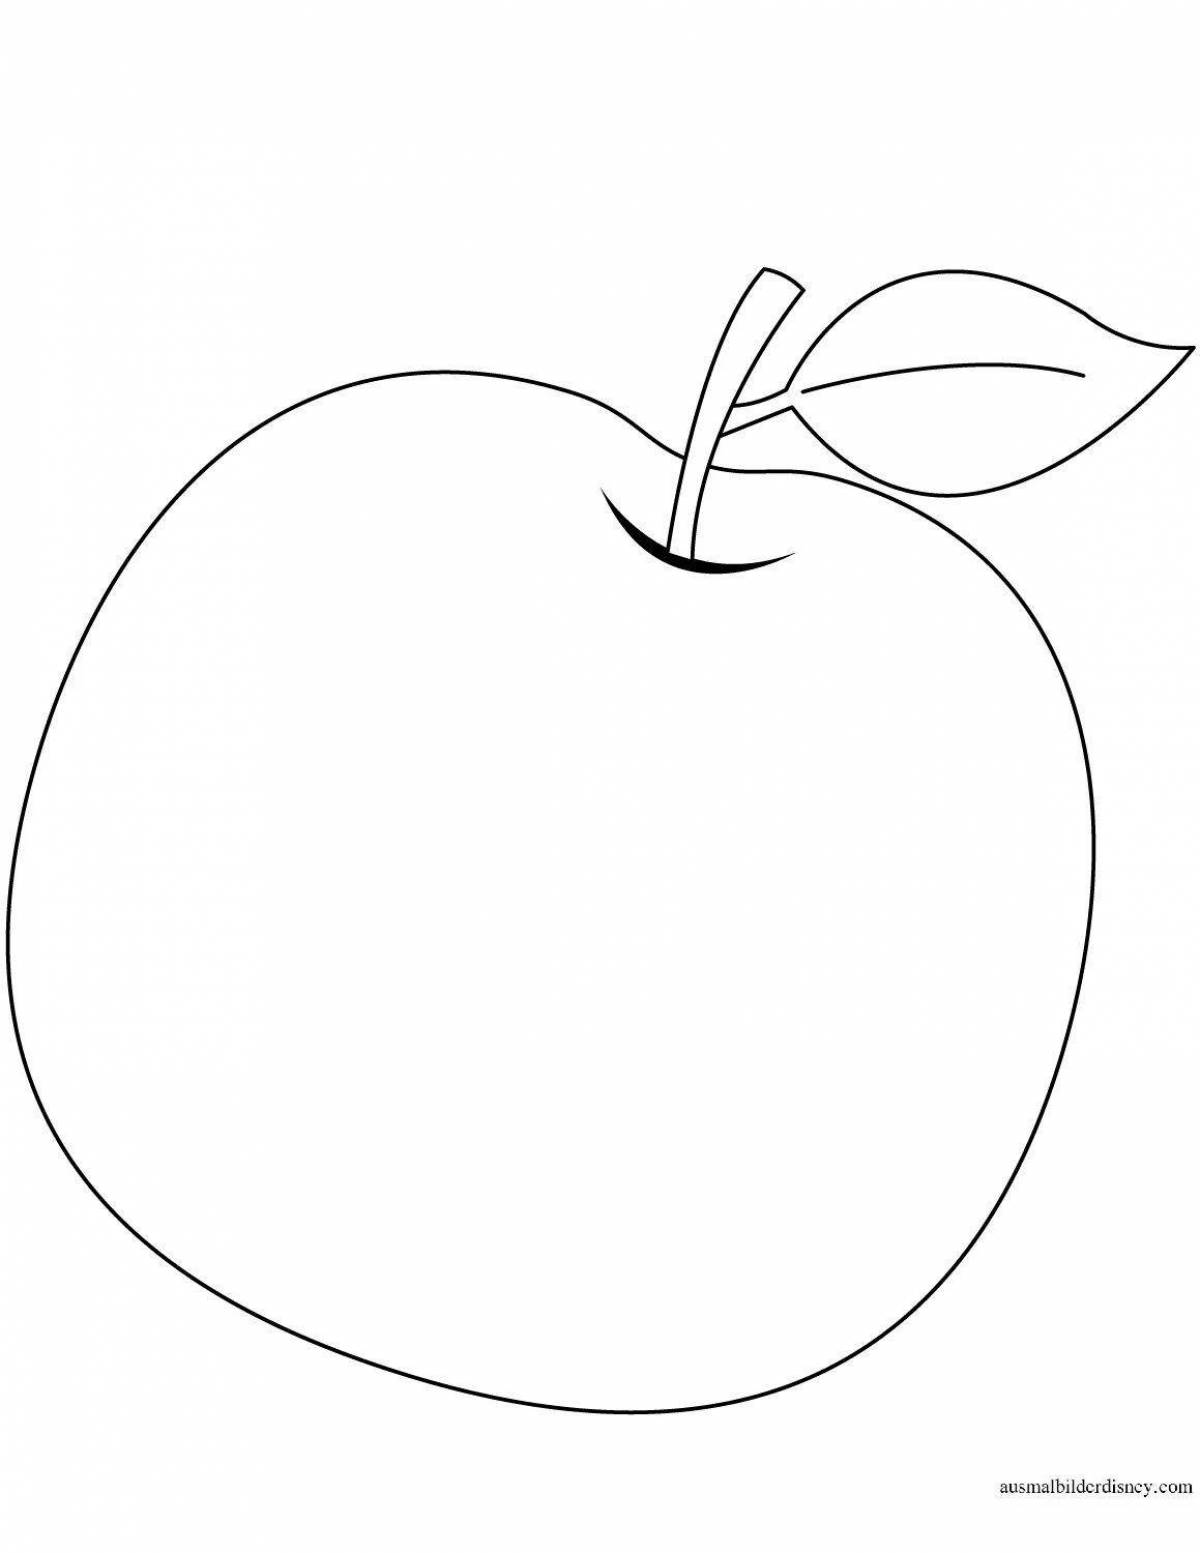 Glamorous apple pear coloring page